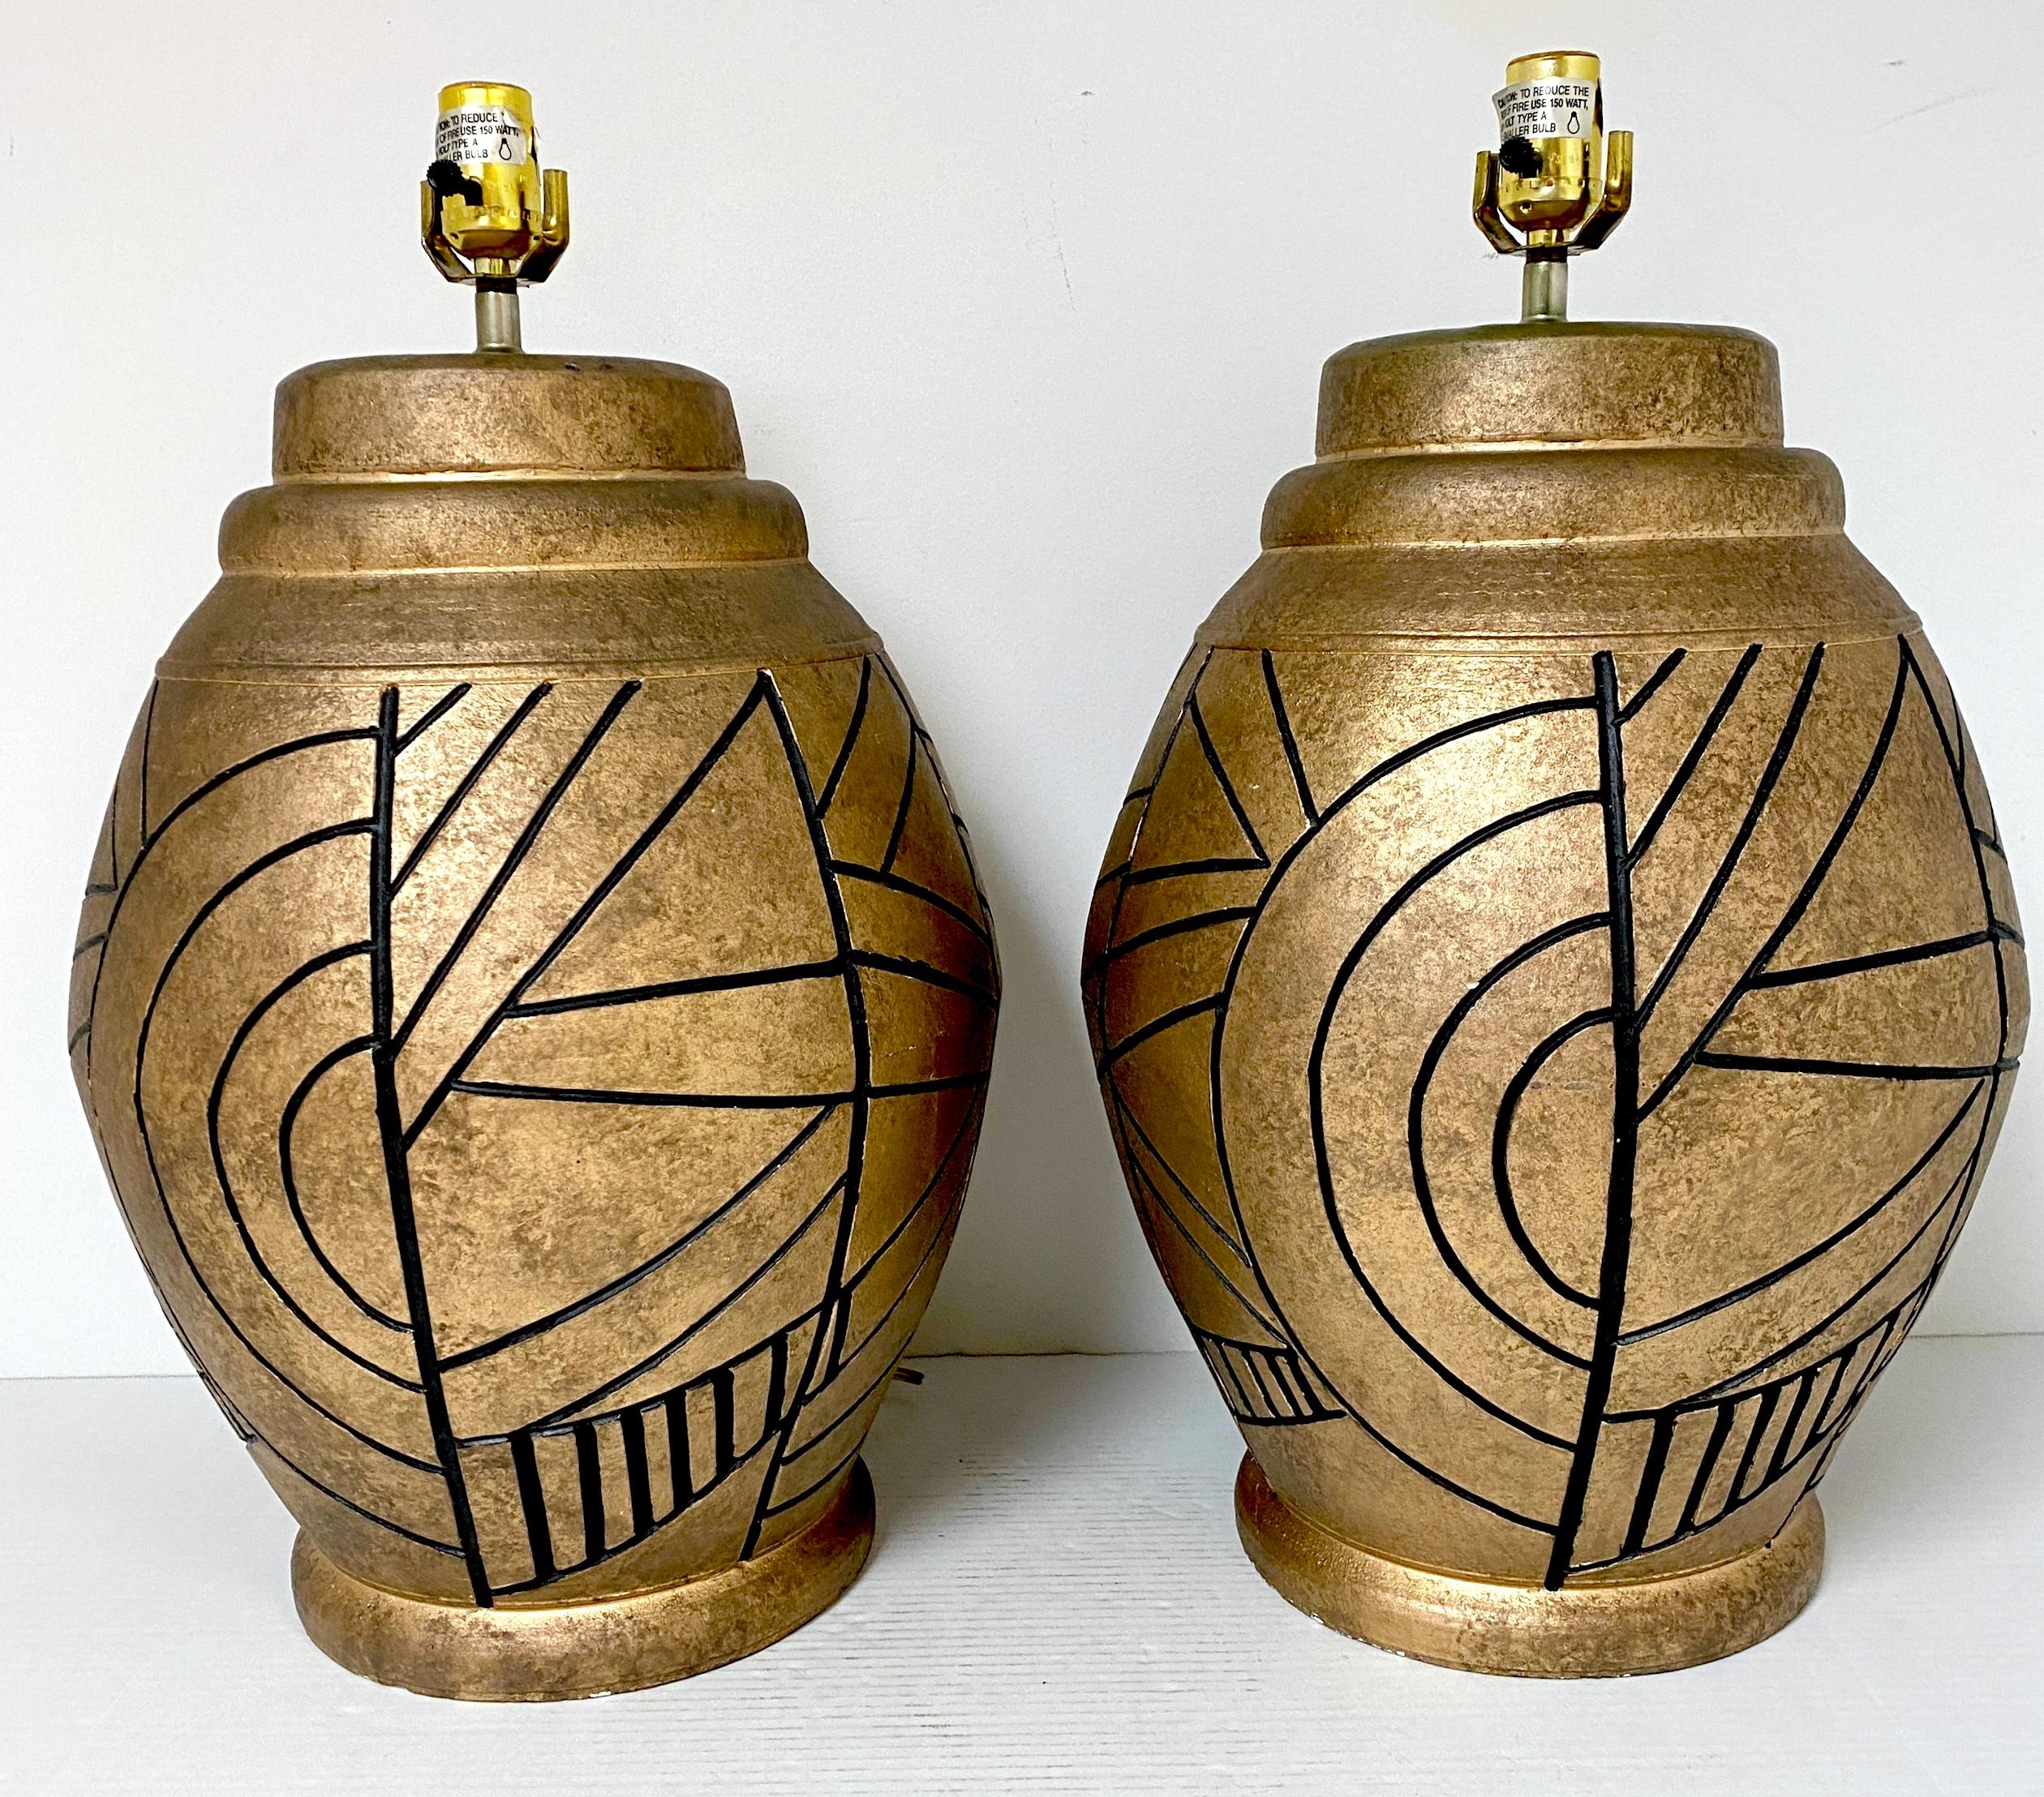 Large Pair of California Studios Earth Tone & Abstract Black Engraved Decoration

A Large Pair of California Studios Earth Tone & Abstract Black Engraved Decoration lamps. Each lamp boasts substantial size and scale, standing at 22 inches high to